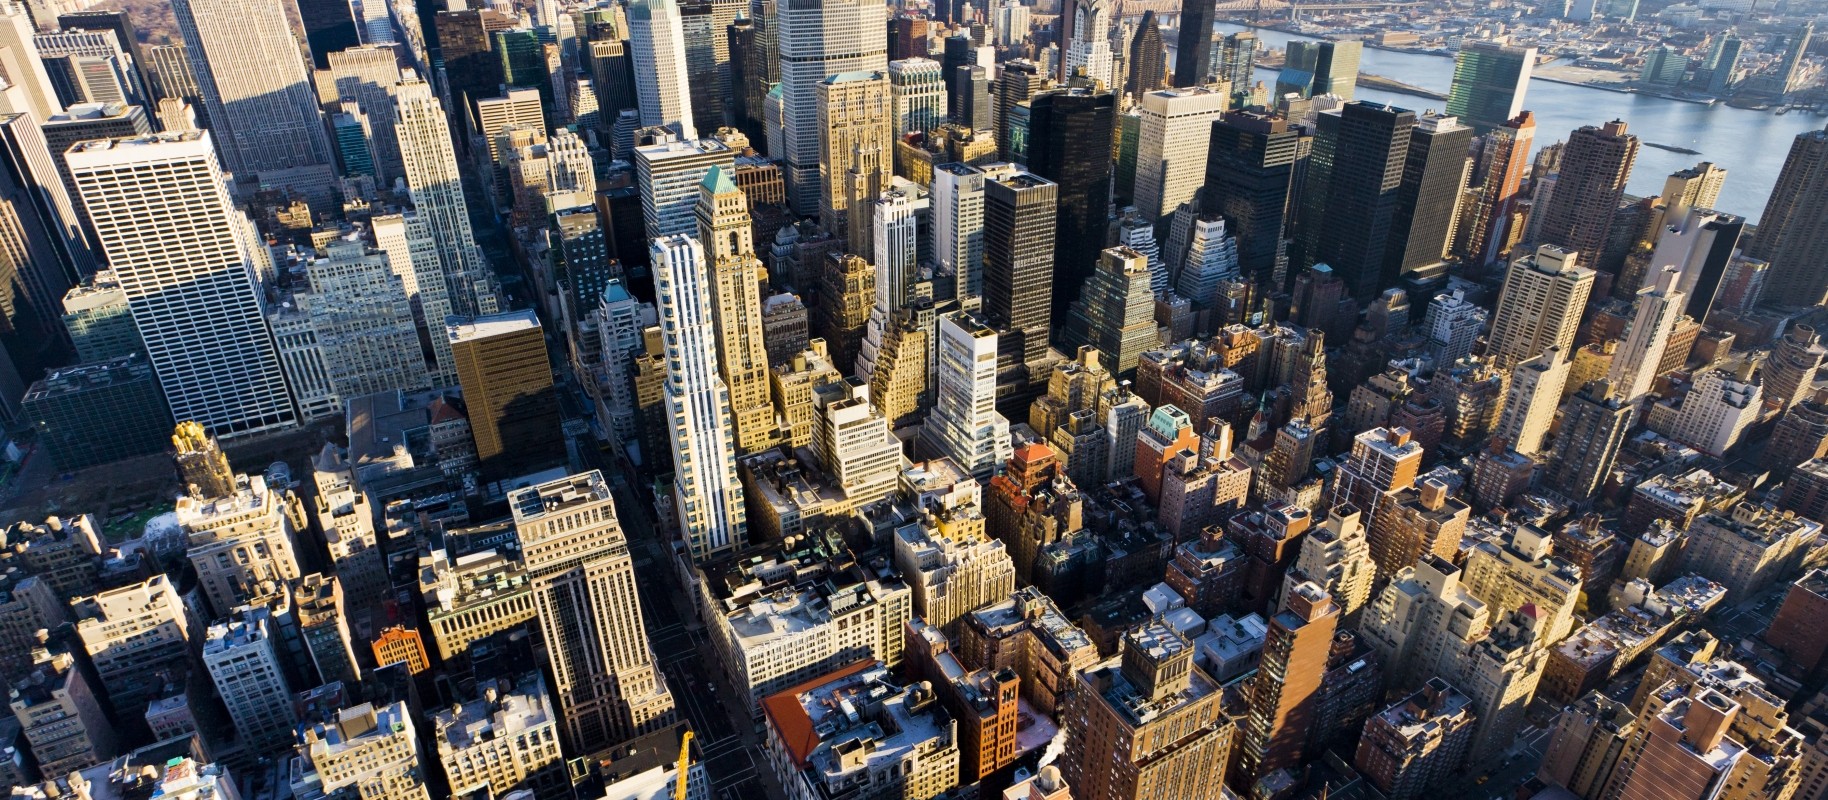 stockfresh_1738847_view-of-manhattan-from-the-empire-state-building-new-york-city_sizeM